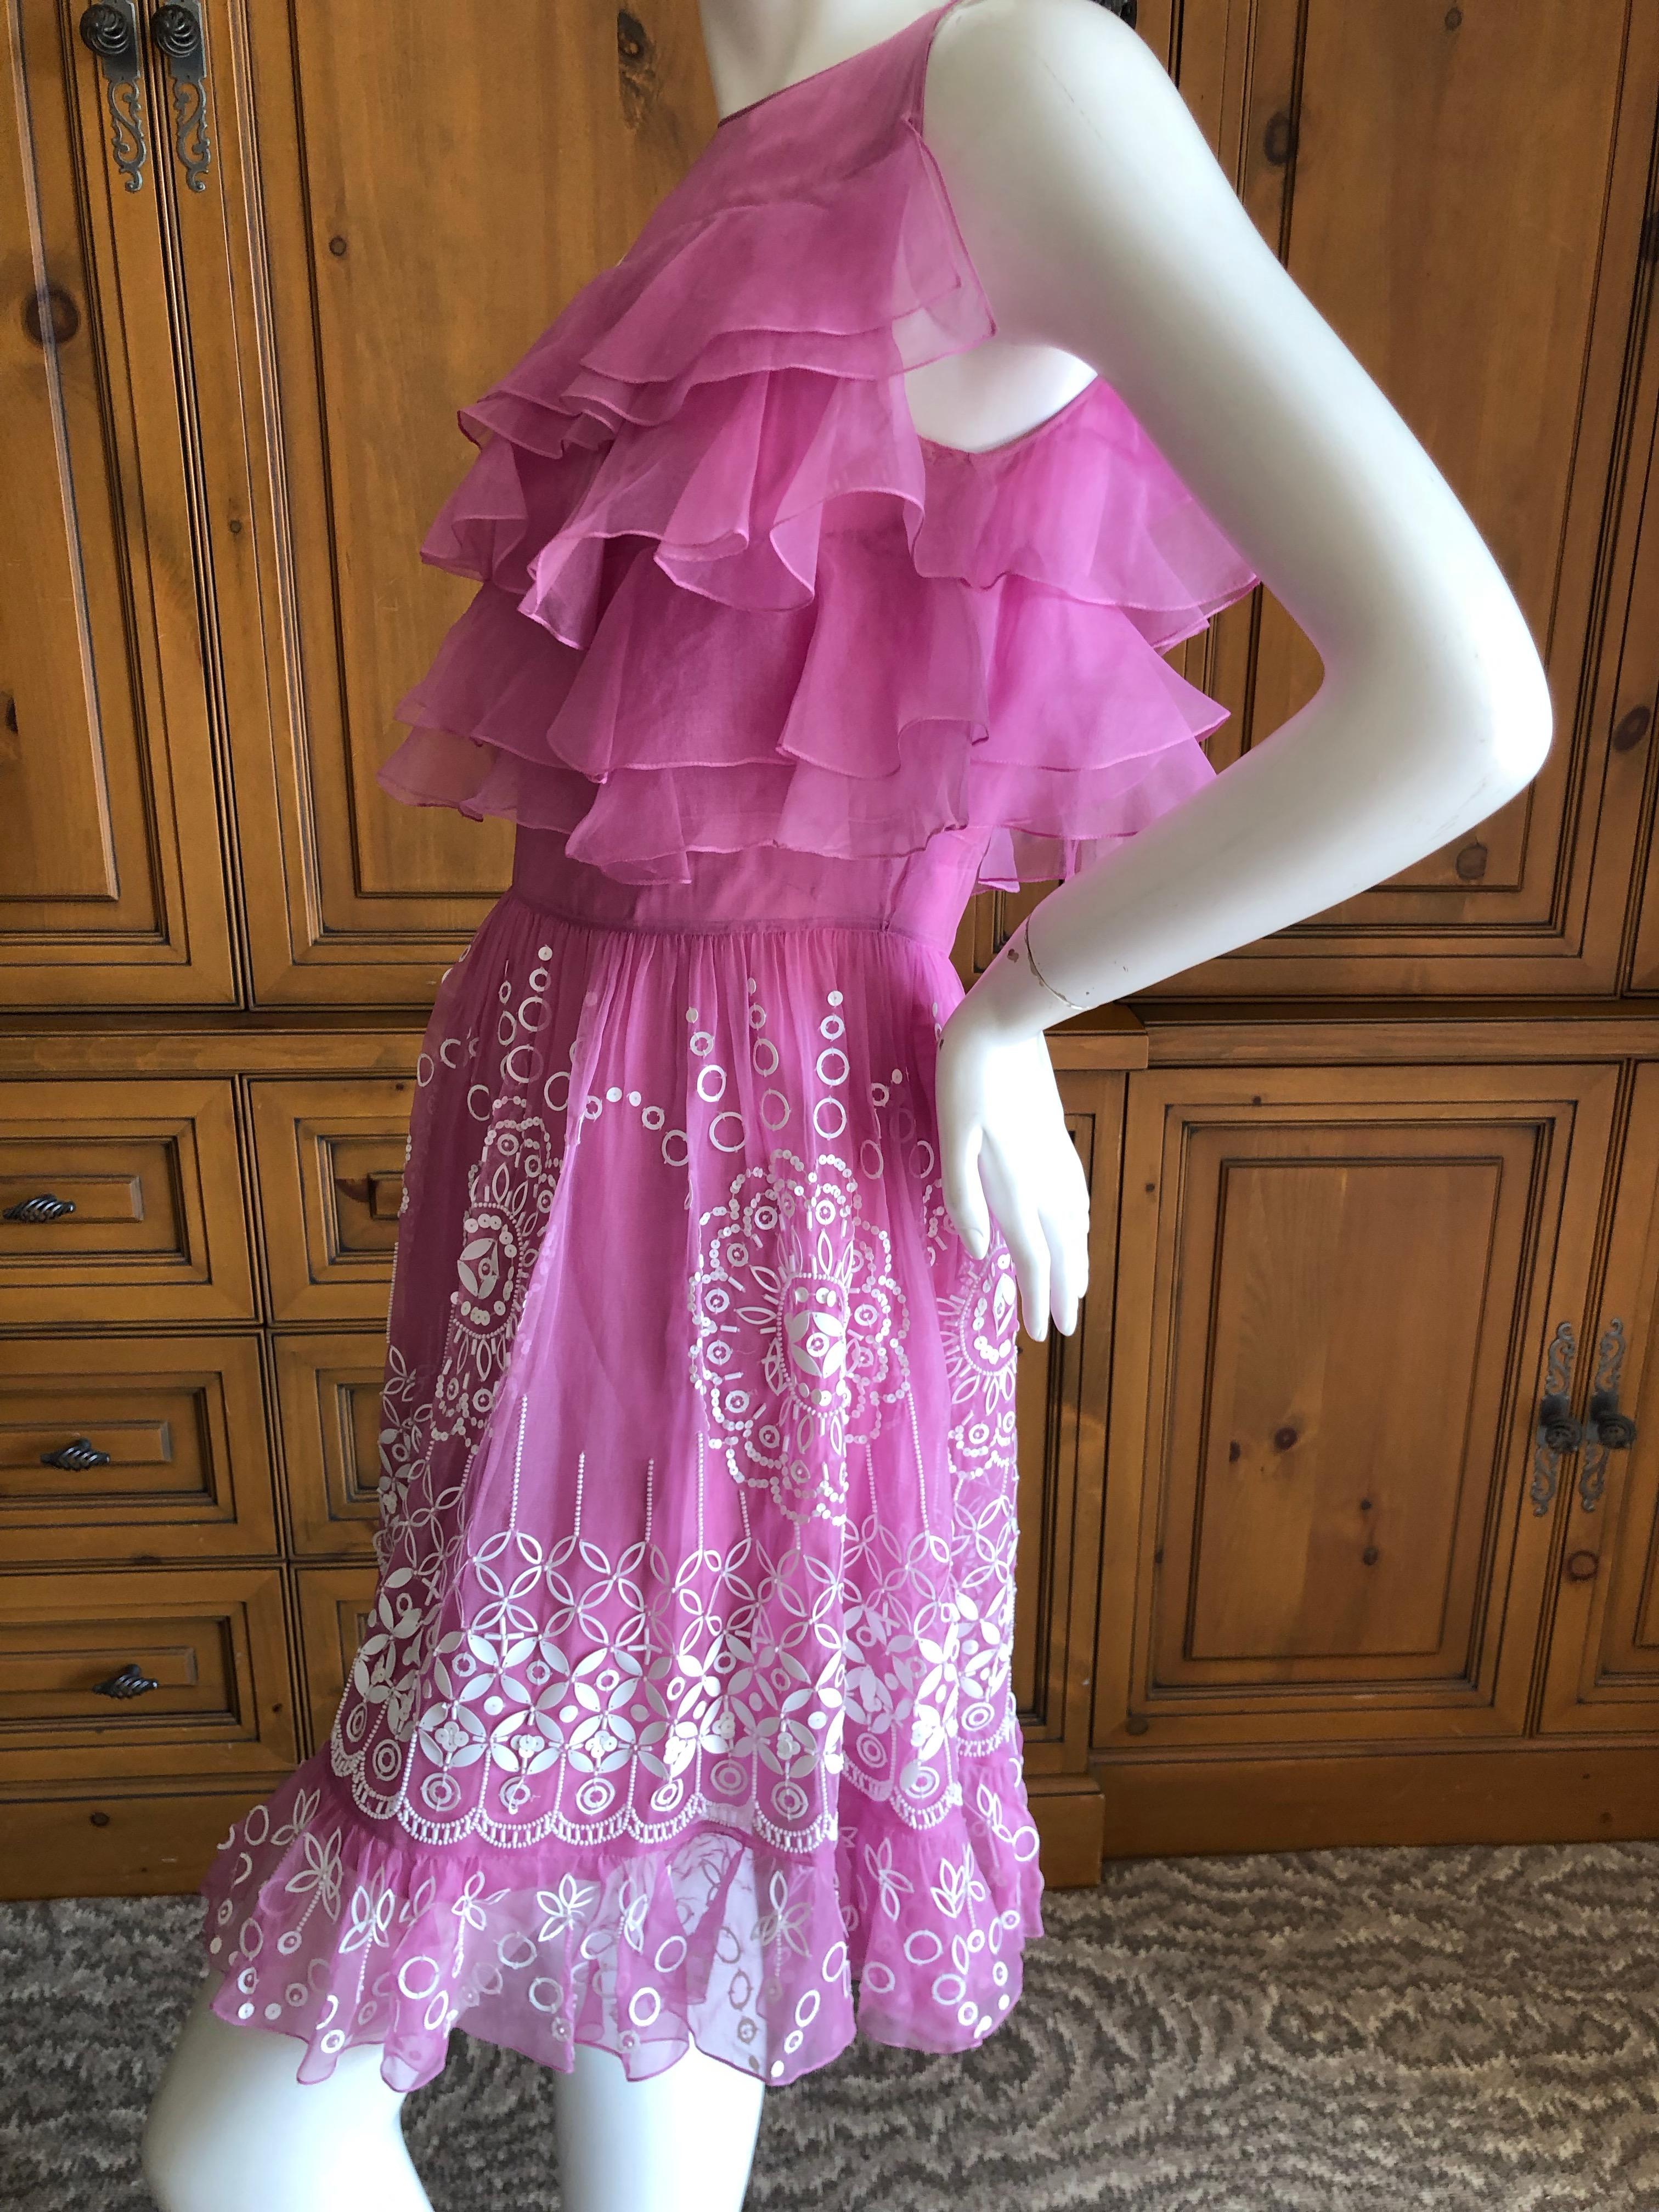 Christian Dior by John Galliano Pink Silk Dress with White Embellishments For Sale 6